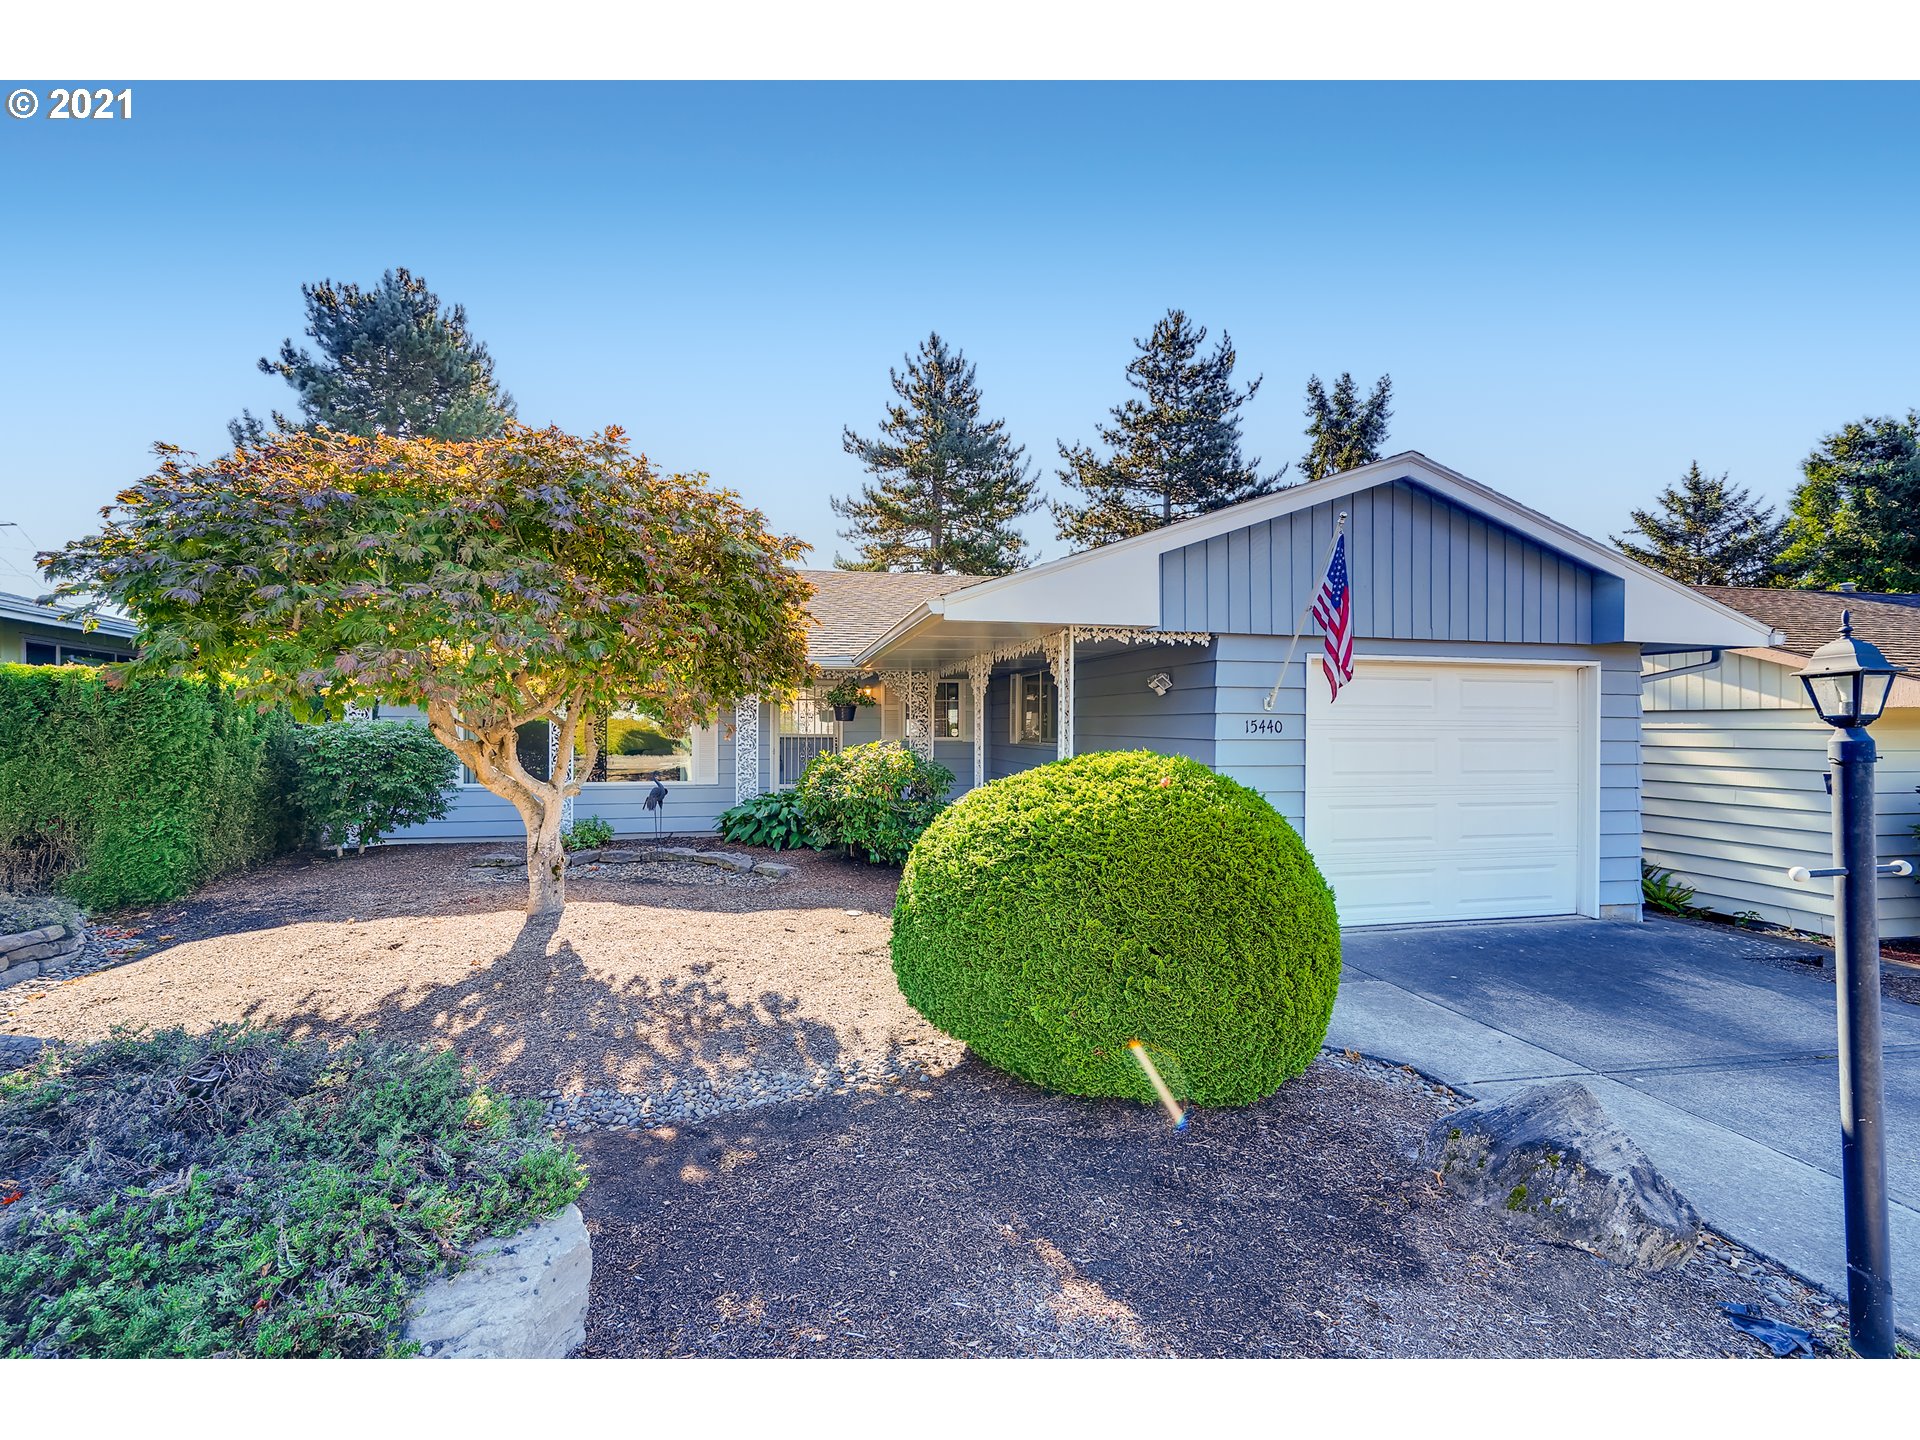 15440 SW ROYALTY PKWY (1 of 25)